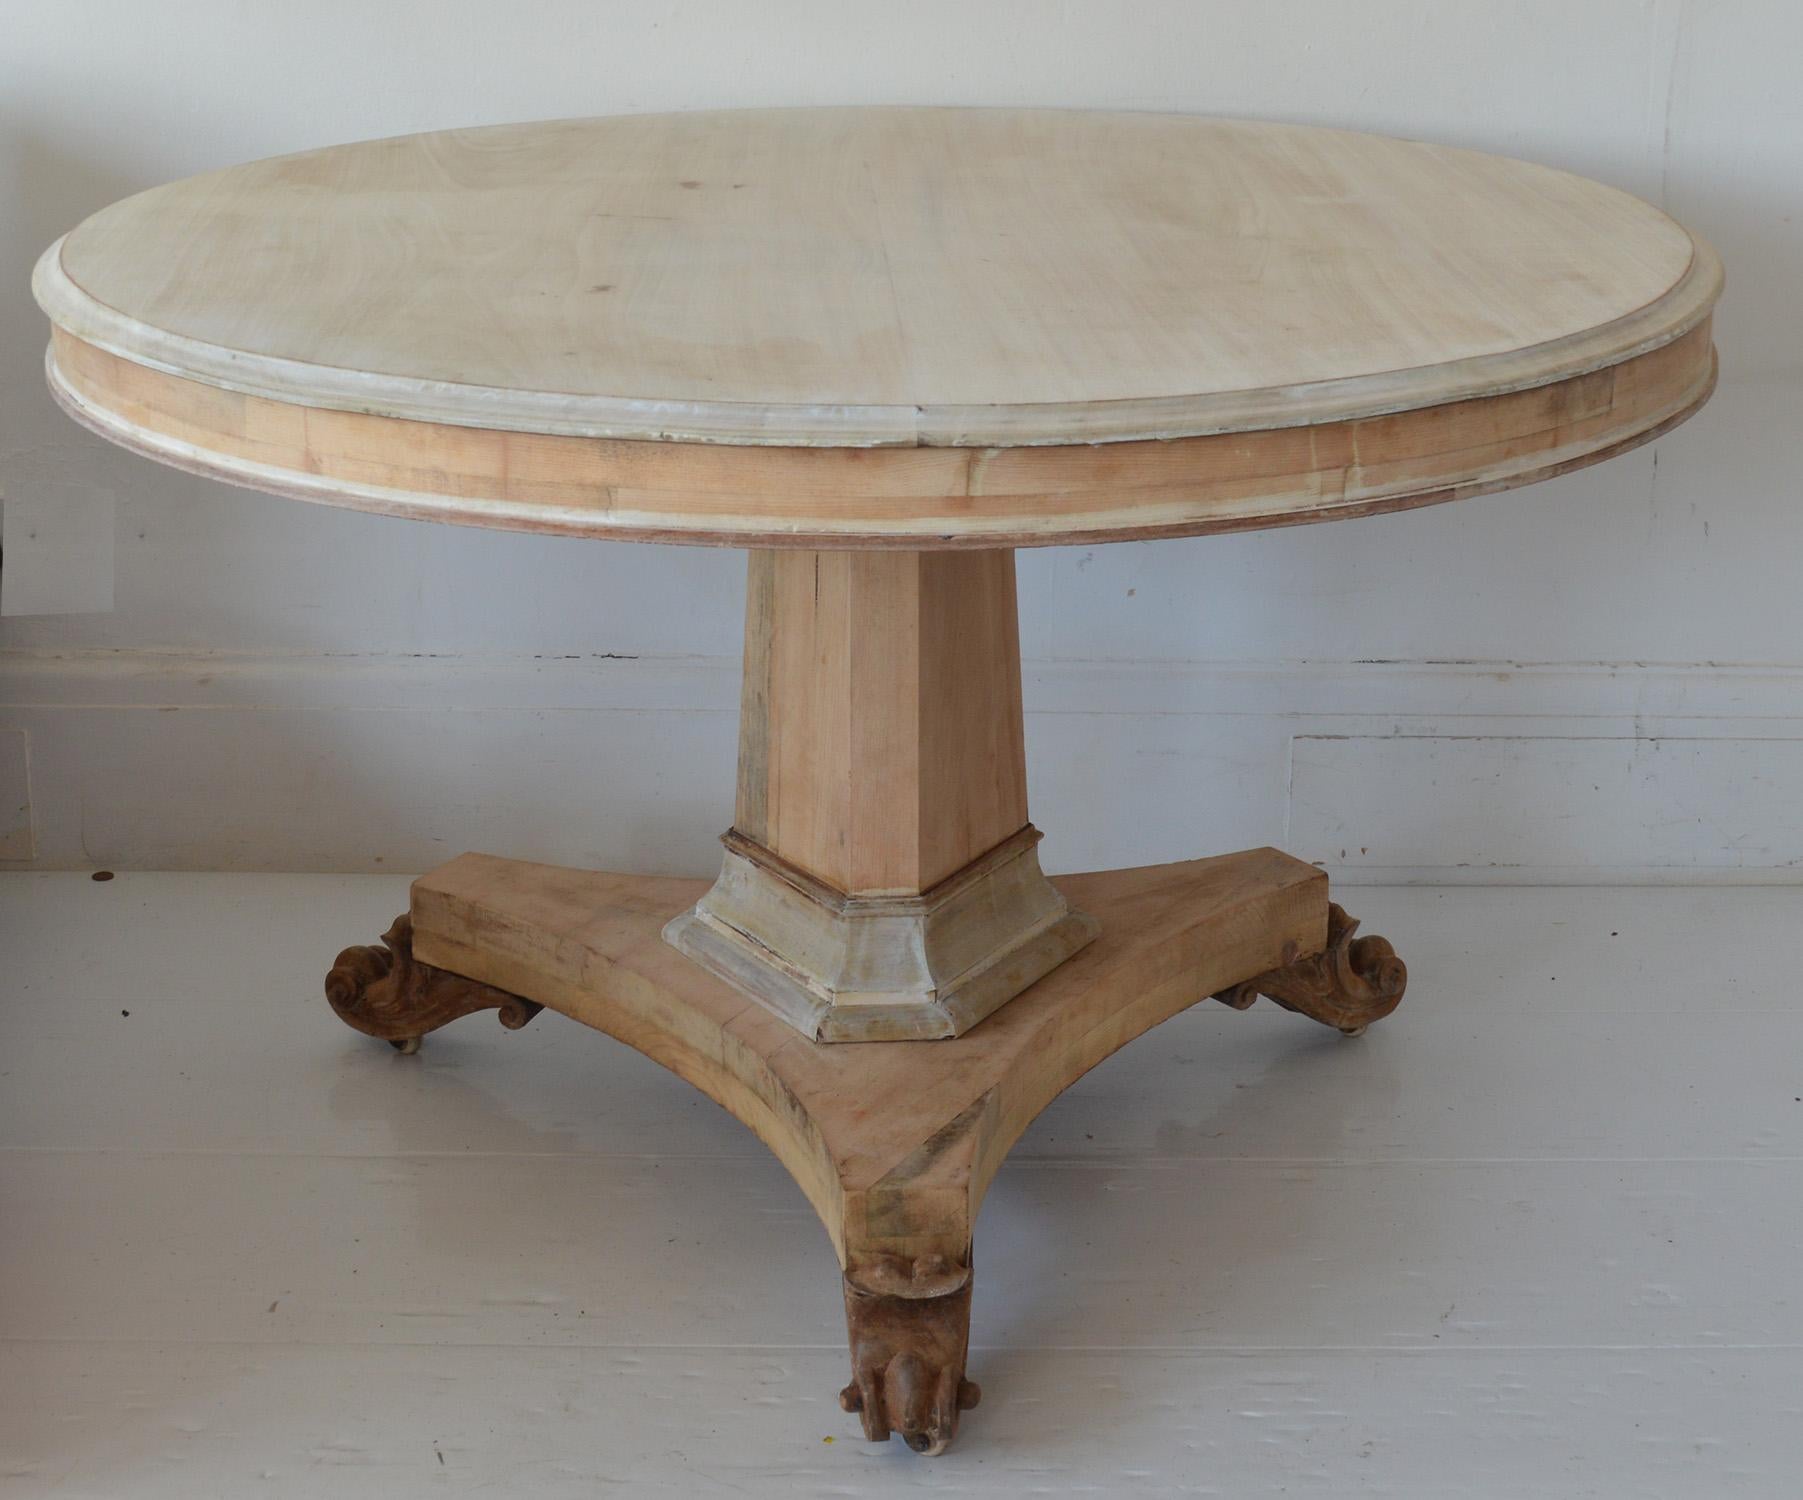 Greek Revival Large Antique Round Pine and Bleached Mahogany Table, English, circa 1830